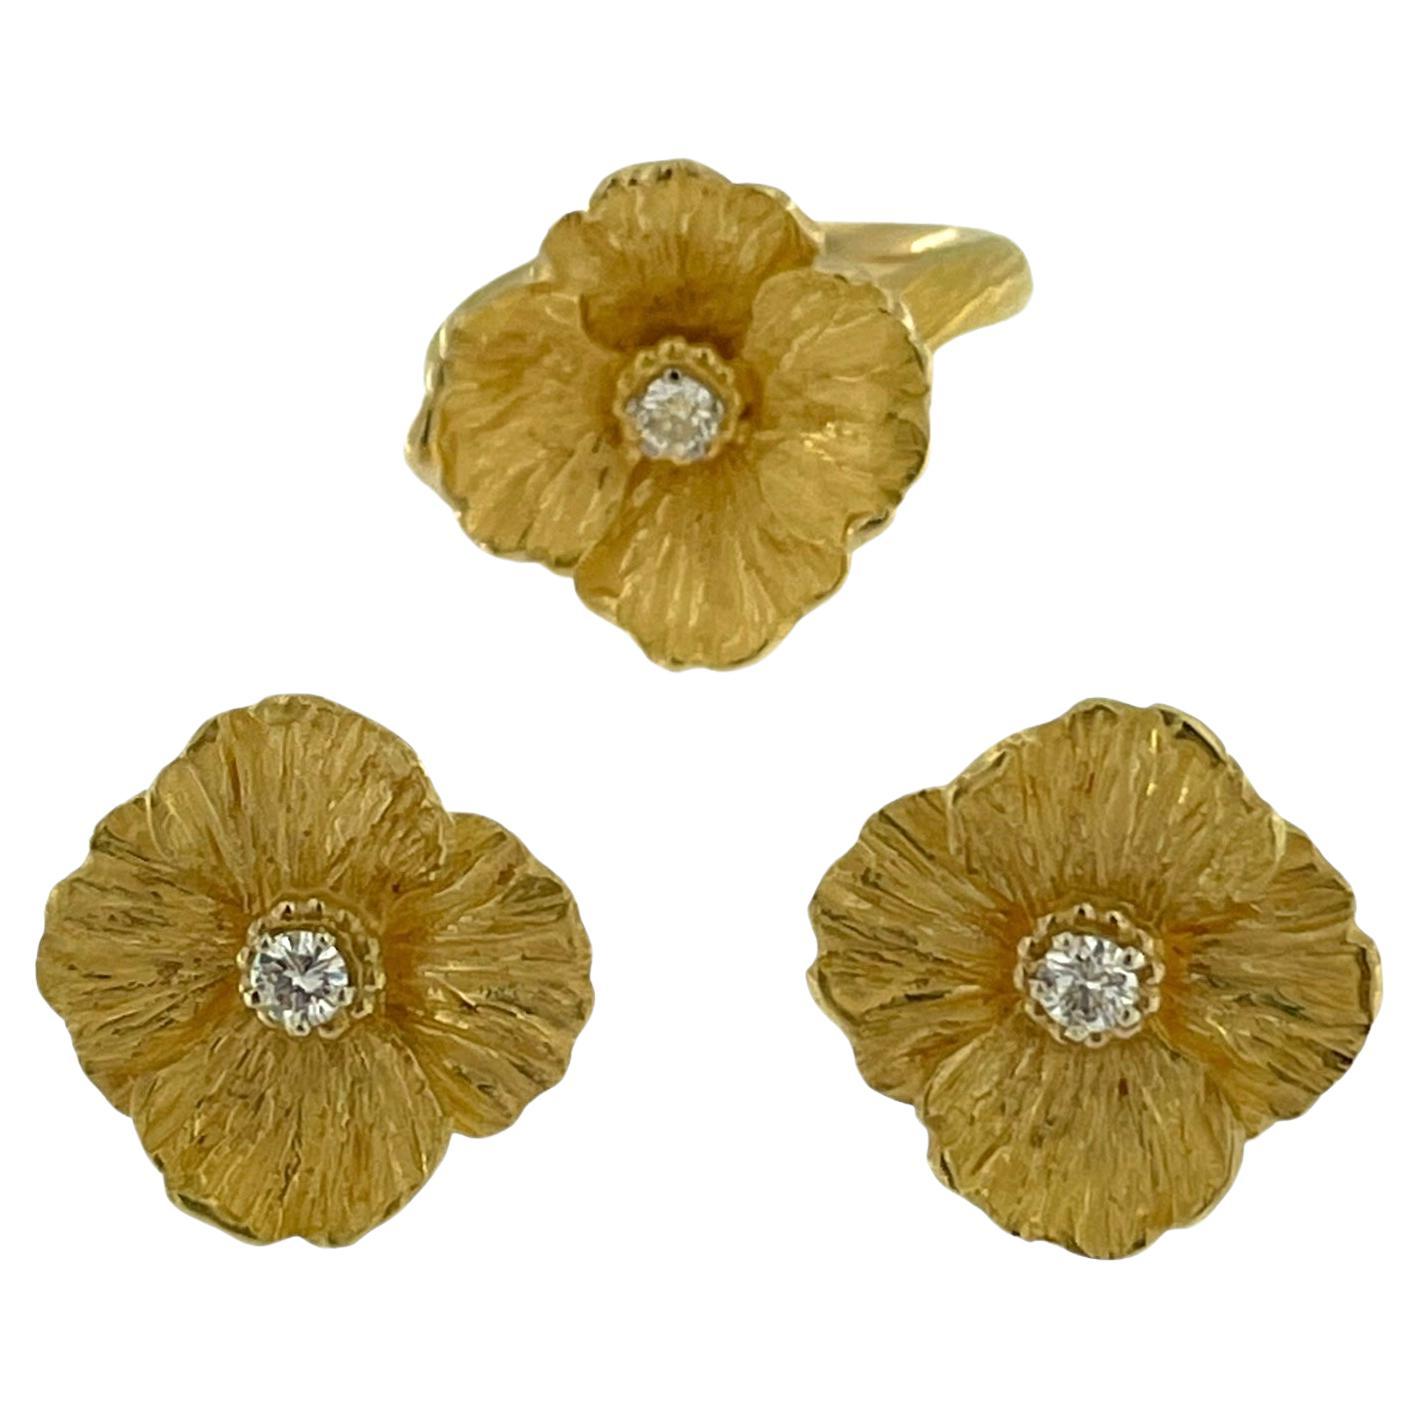 HRD Certified Yellow Gold Flower Set Ring and Earrings with Diamonds